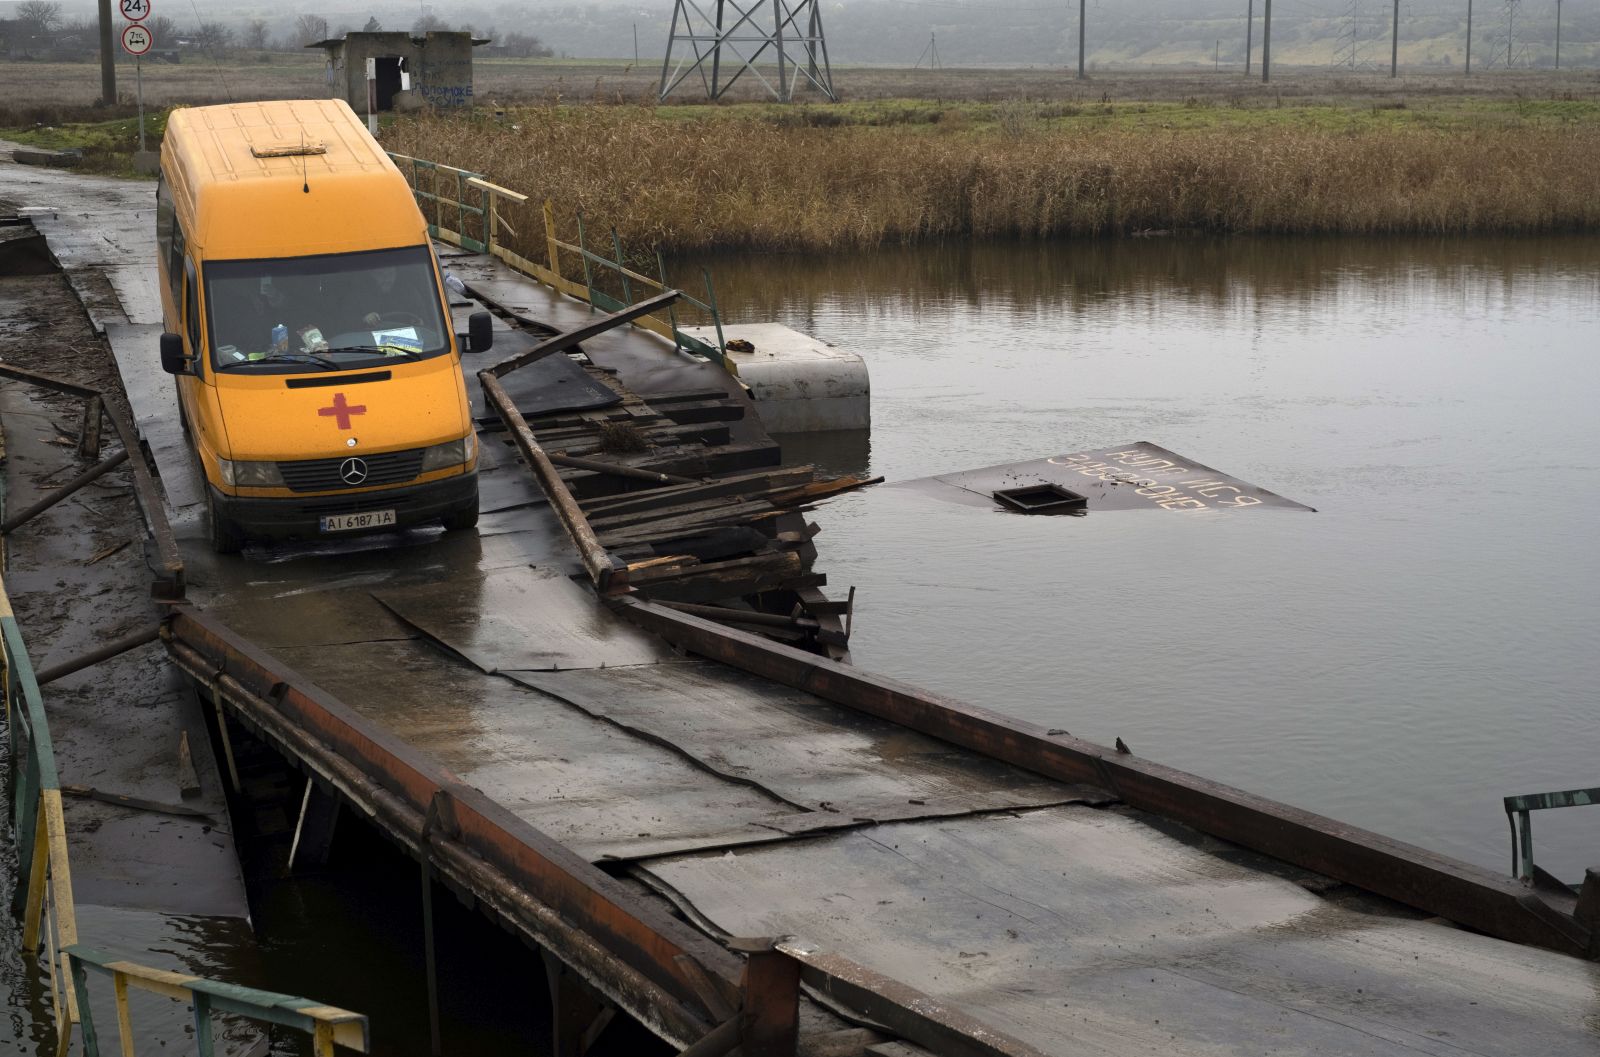 epa10317351 A volunteer's car drives on a damaged bridge across the Ingulets river east of Kherson, Ukraine, 20 November 2022 (issued 21 November 2022). That territory does not have electricity, connection, gas, water supply, the possibility to buy food and other indications of civilization. The Ukrainian army is pushing Russian troops from occupied territory in the south of the country in a counterattack. Russian troops entered Ukraine on 24 February 2022 starting a conflict that has provoked destruction and a humanitarian crisis.  EPA/GEORGE IVANCHENKO